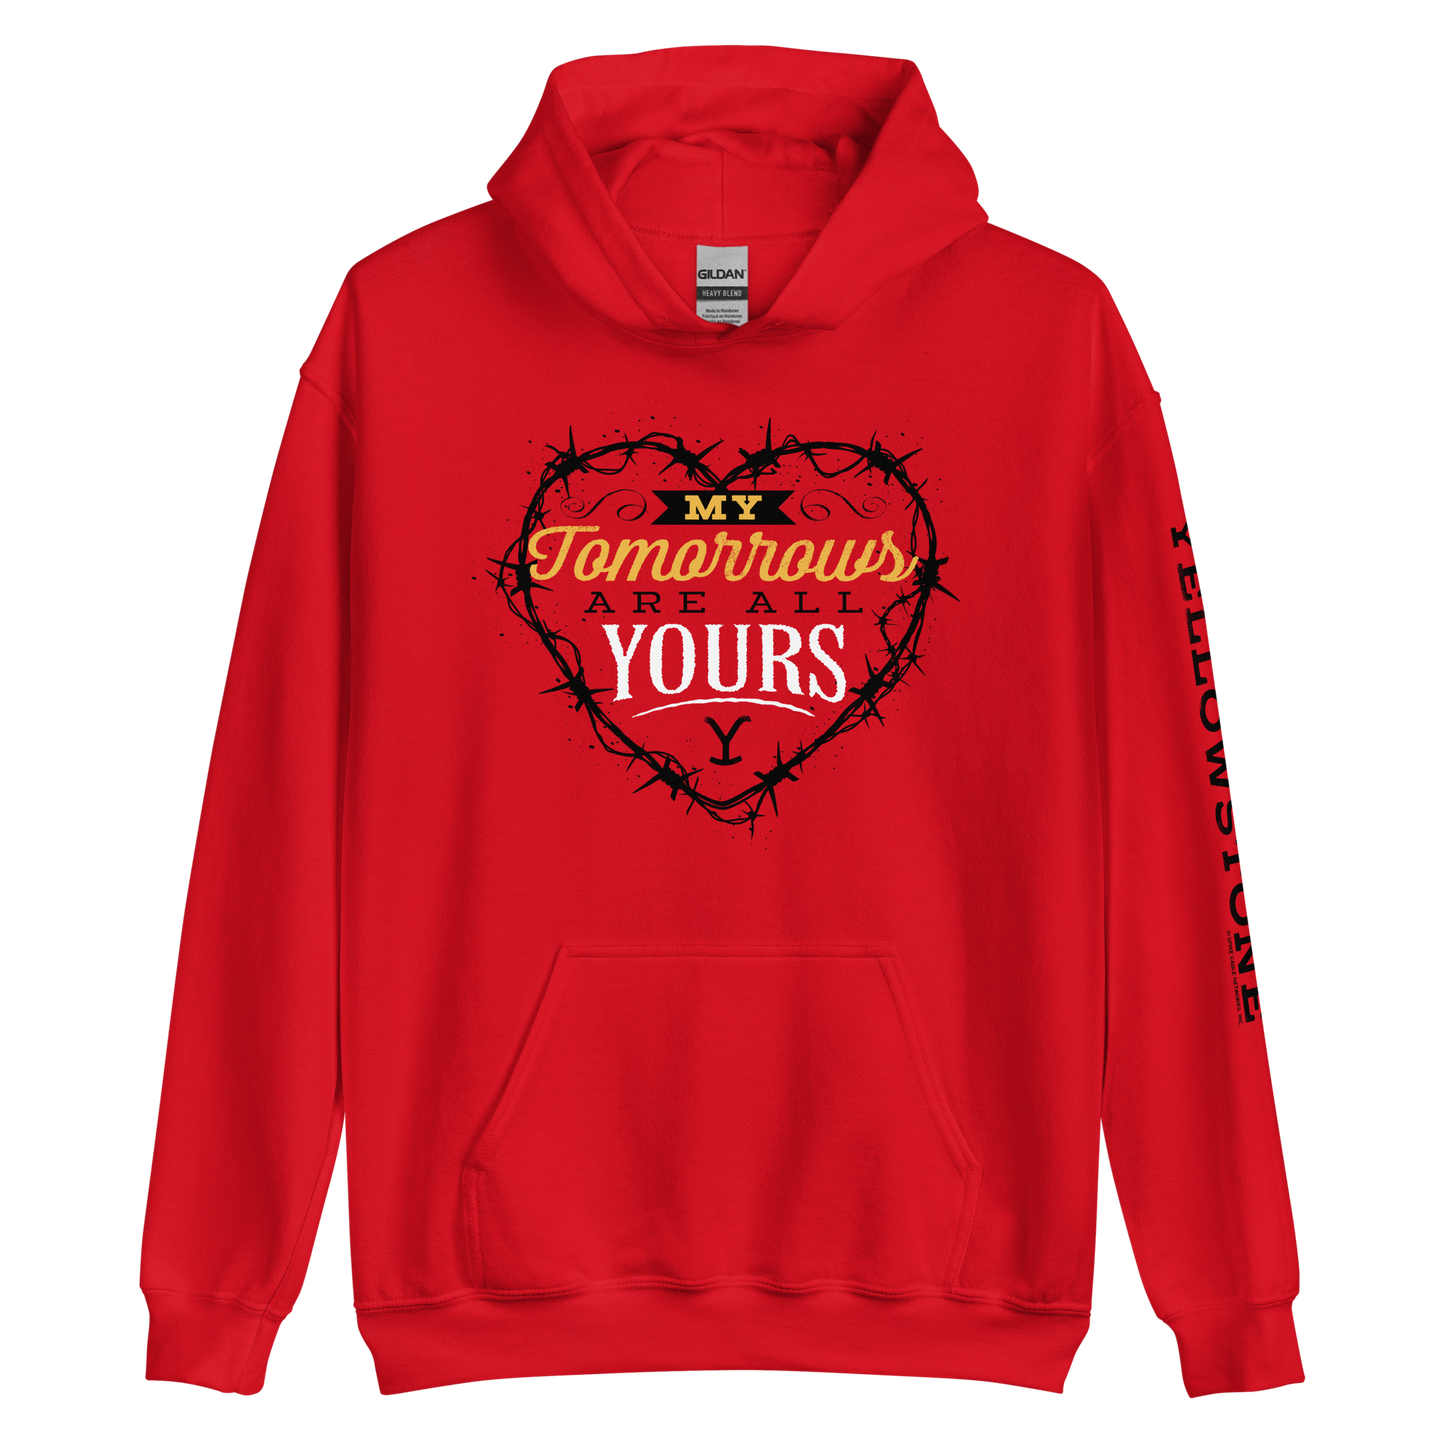 Yellowstone My Tomorrows Are All Yours Sweatshirt mit Kapuze